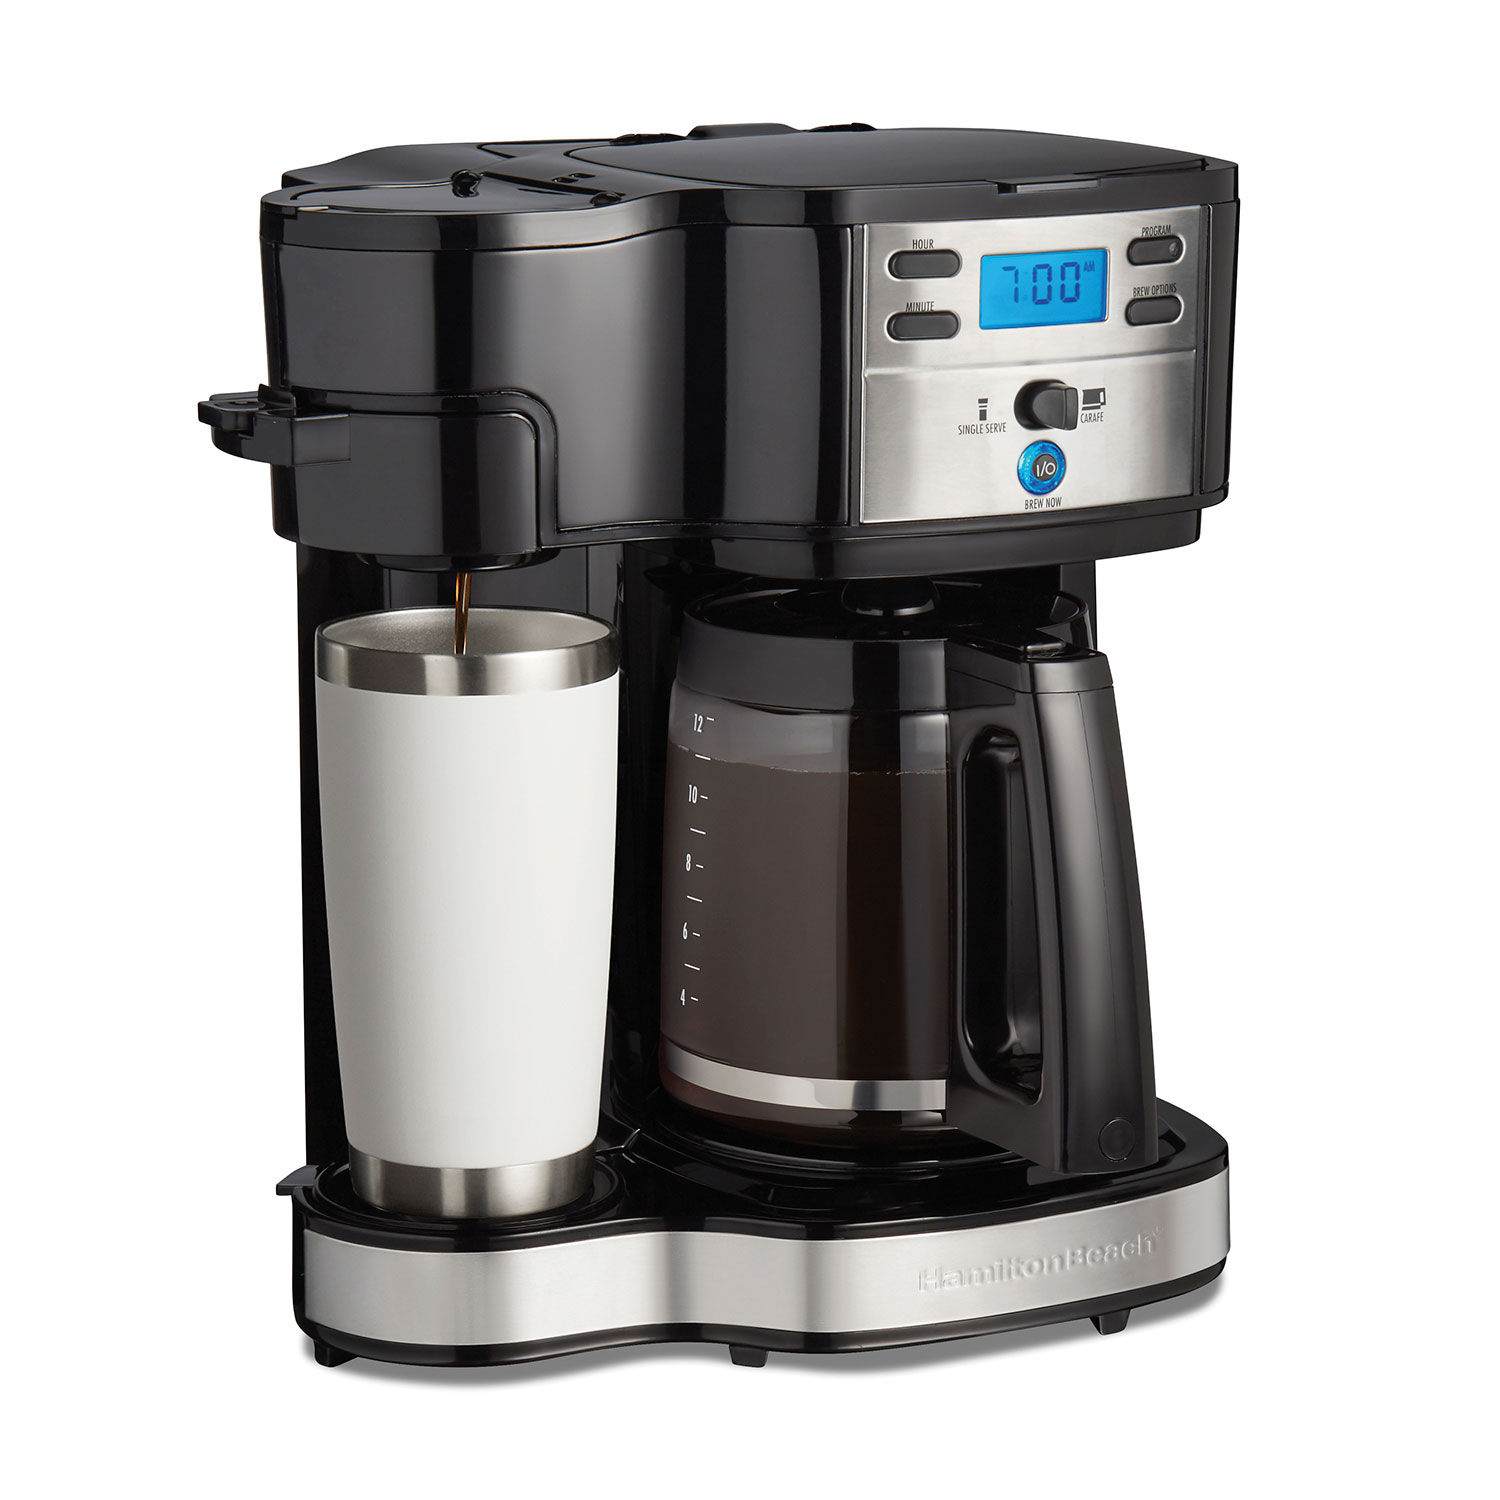 2-Way Programmable Coffee Maker, Stainless (47650F)